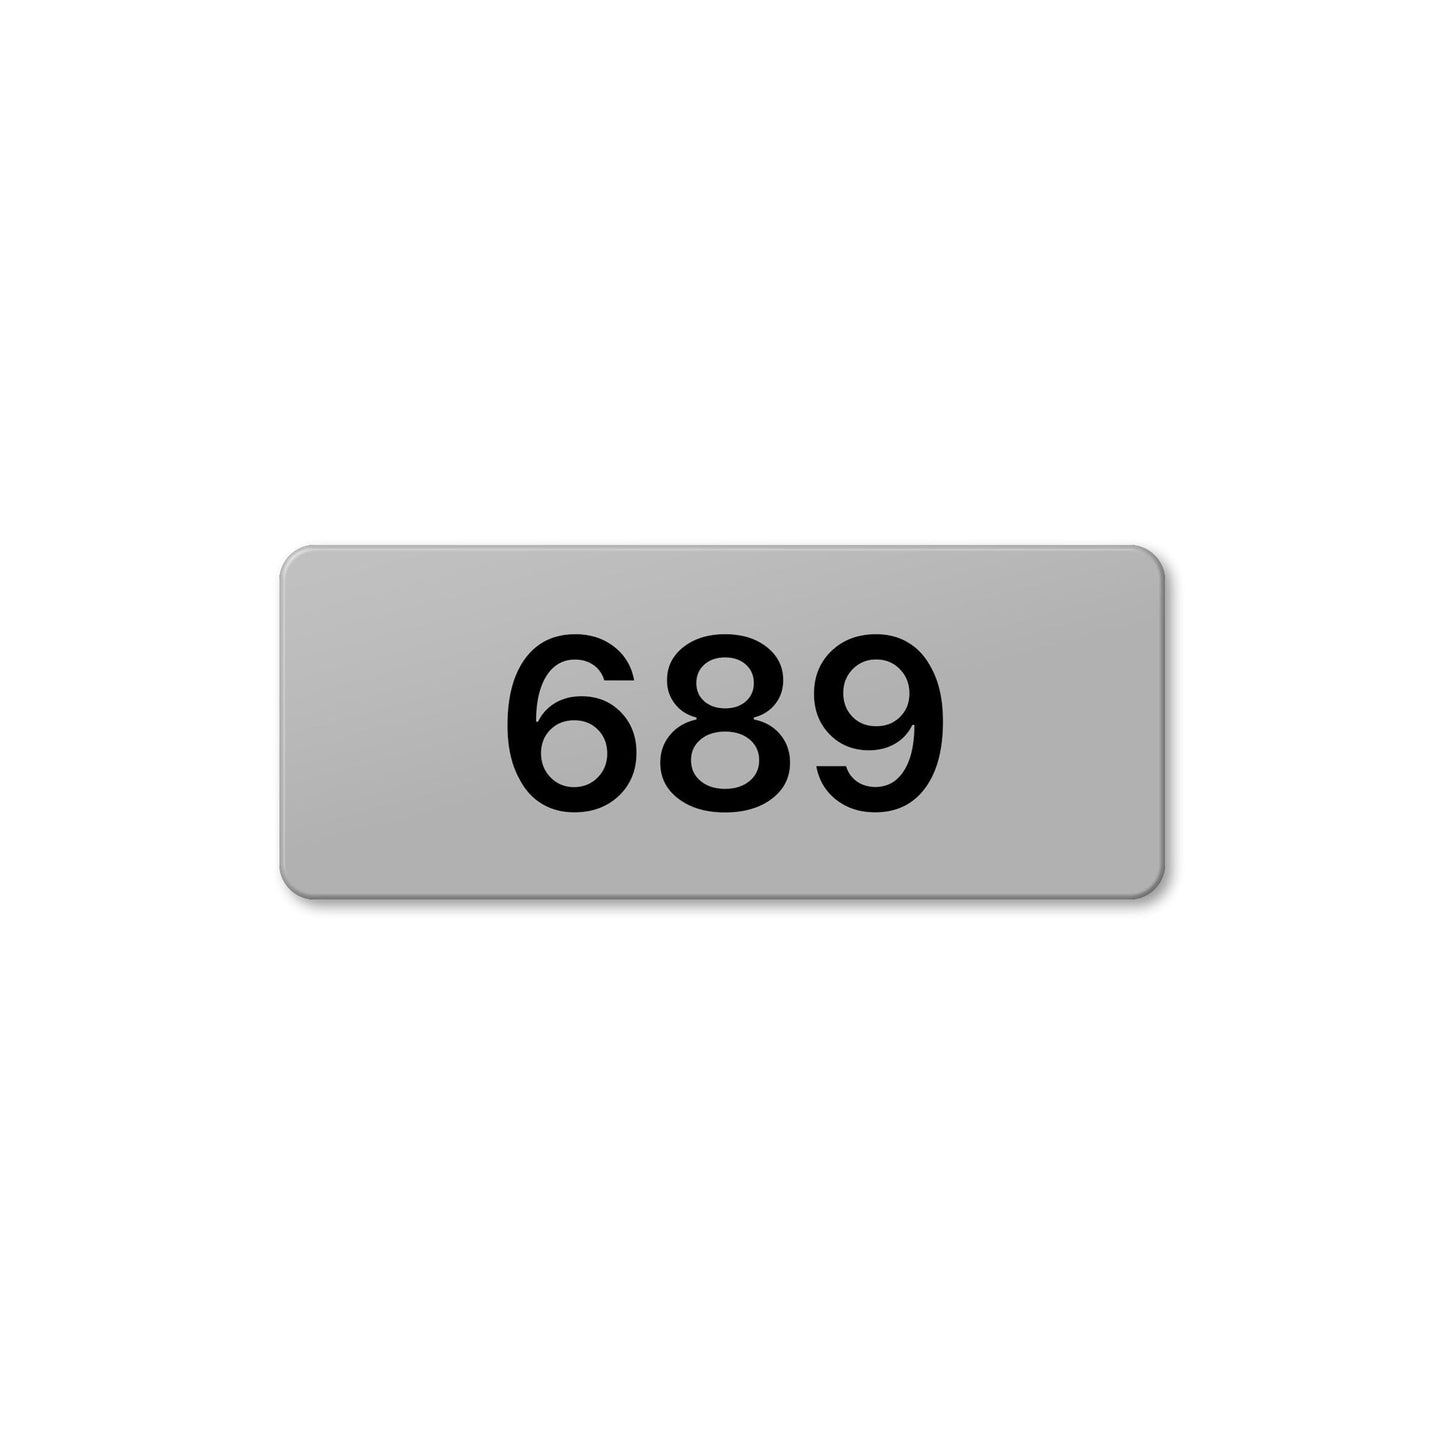 Numeral 689